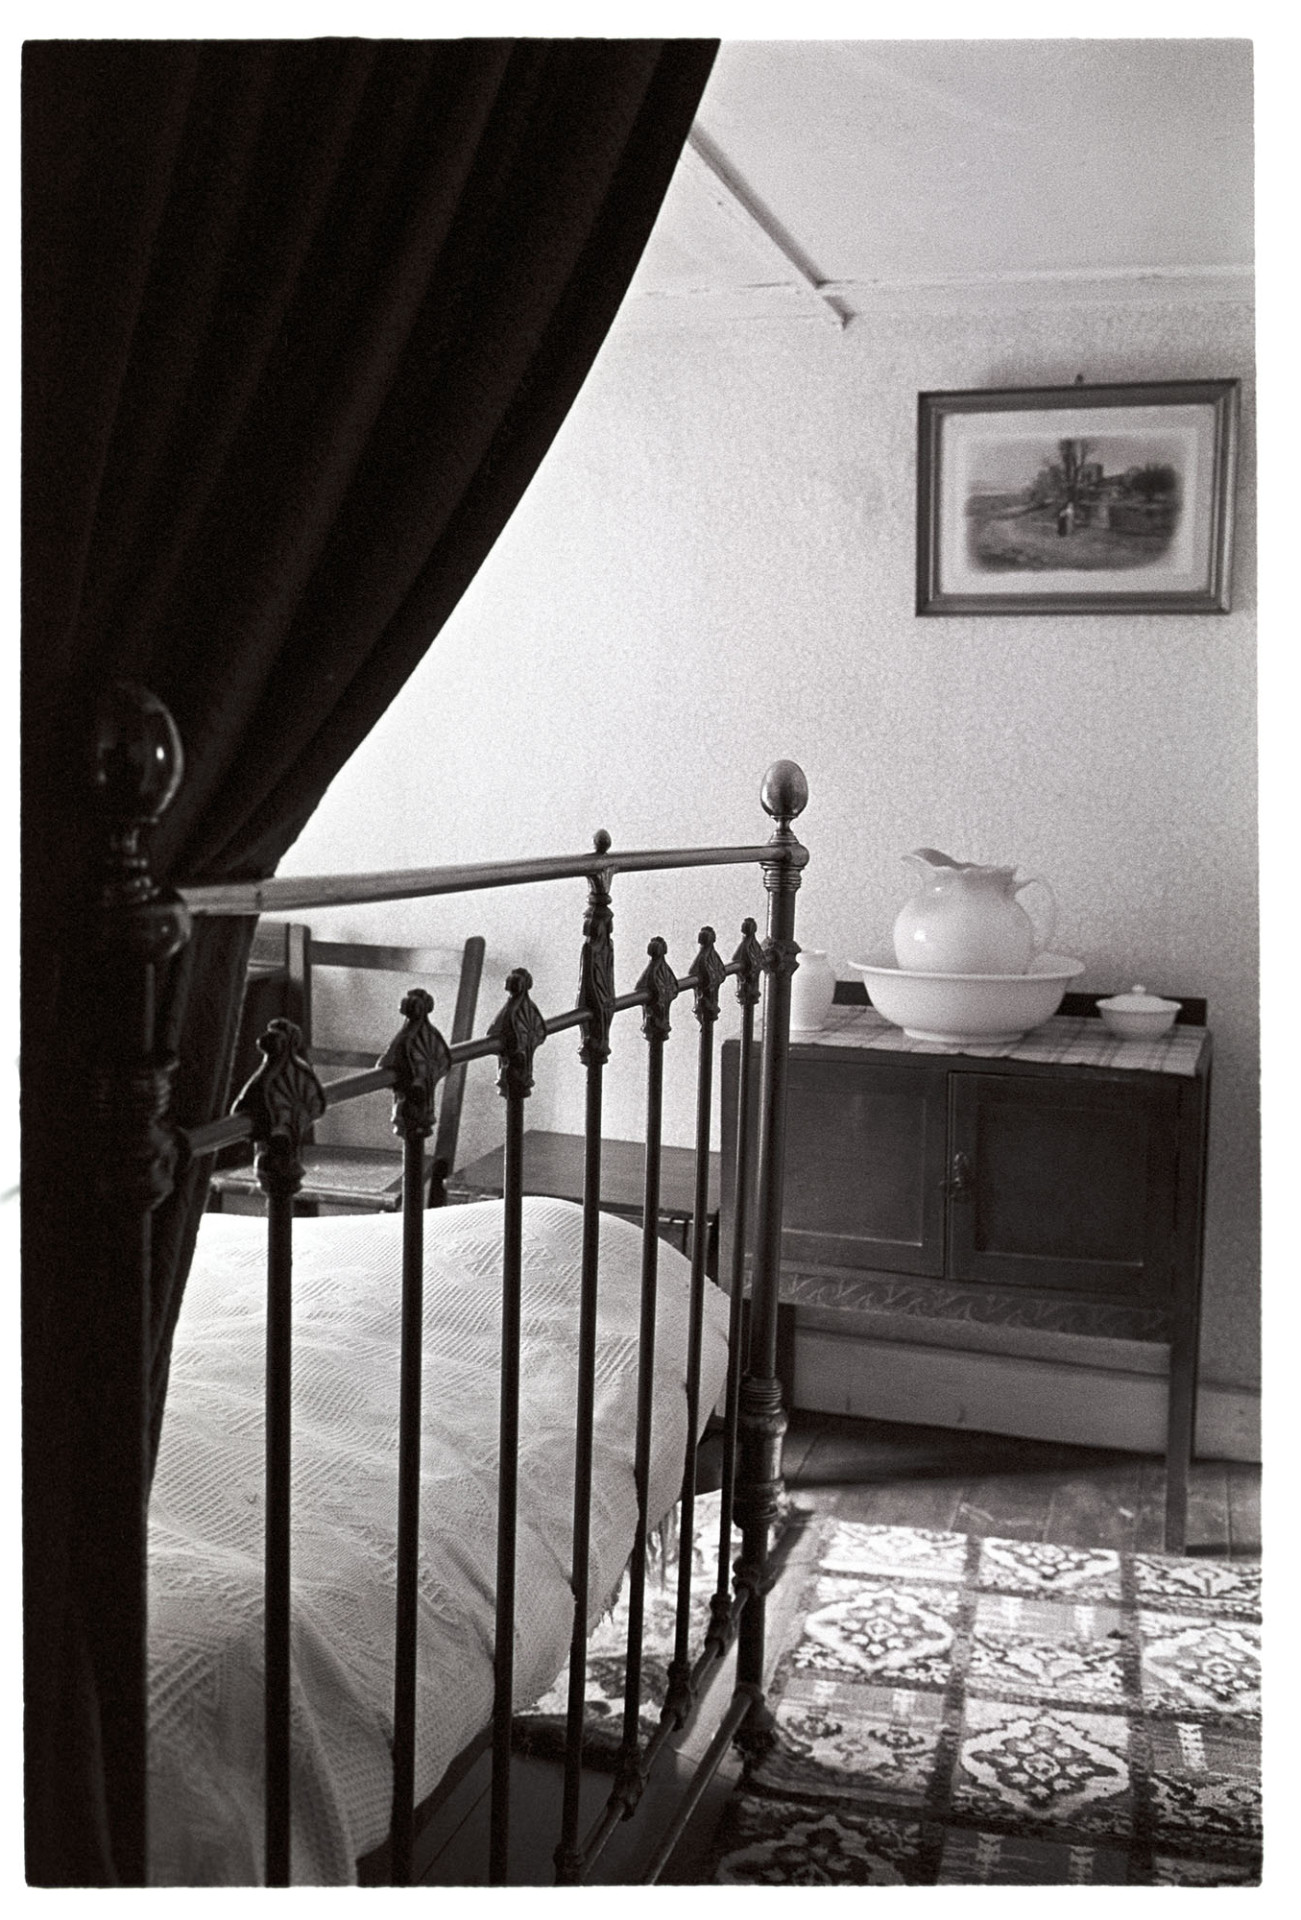 Bedroom interior, washstand  and bedstead.
[A bedroom at Millhams, Dolton, with a washstand and a wrought iron bedstead. Possibly in Archie Parkhouse's house.  A picture hangs on the wall above the washstand.]